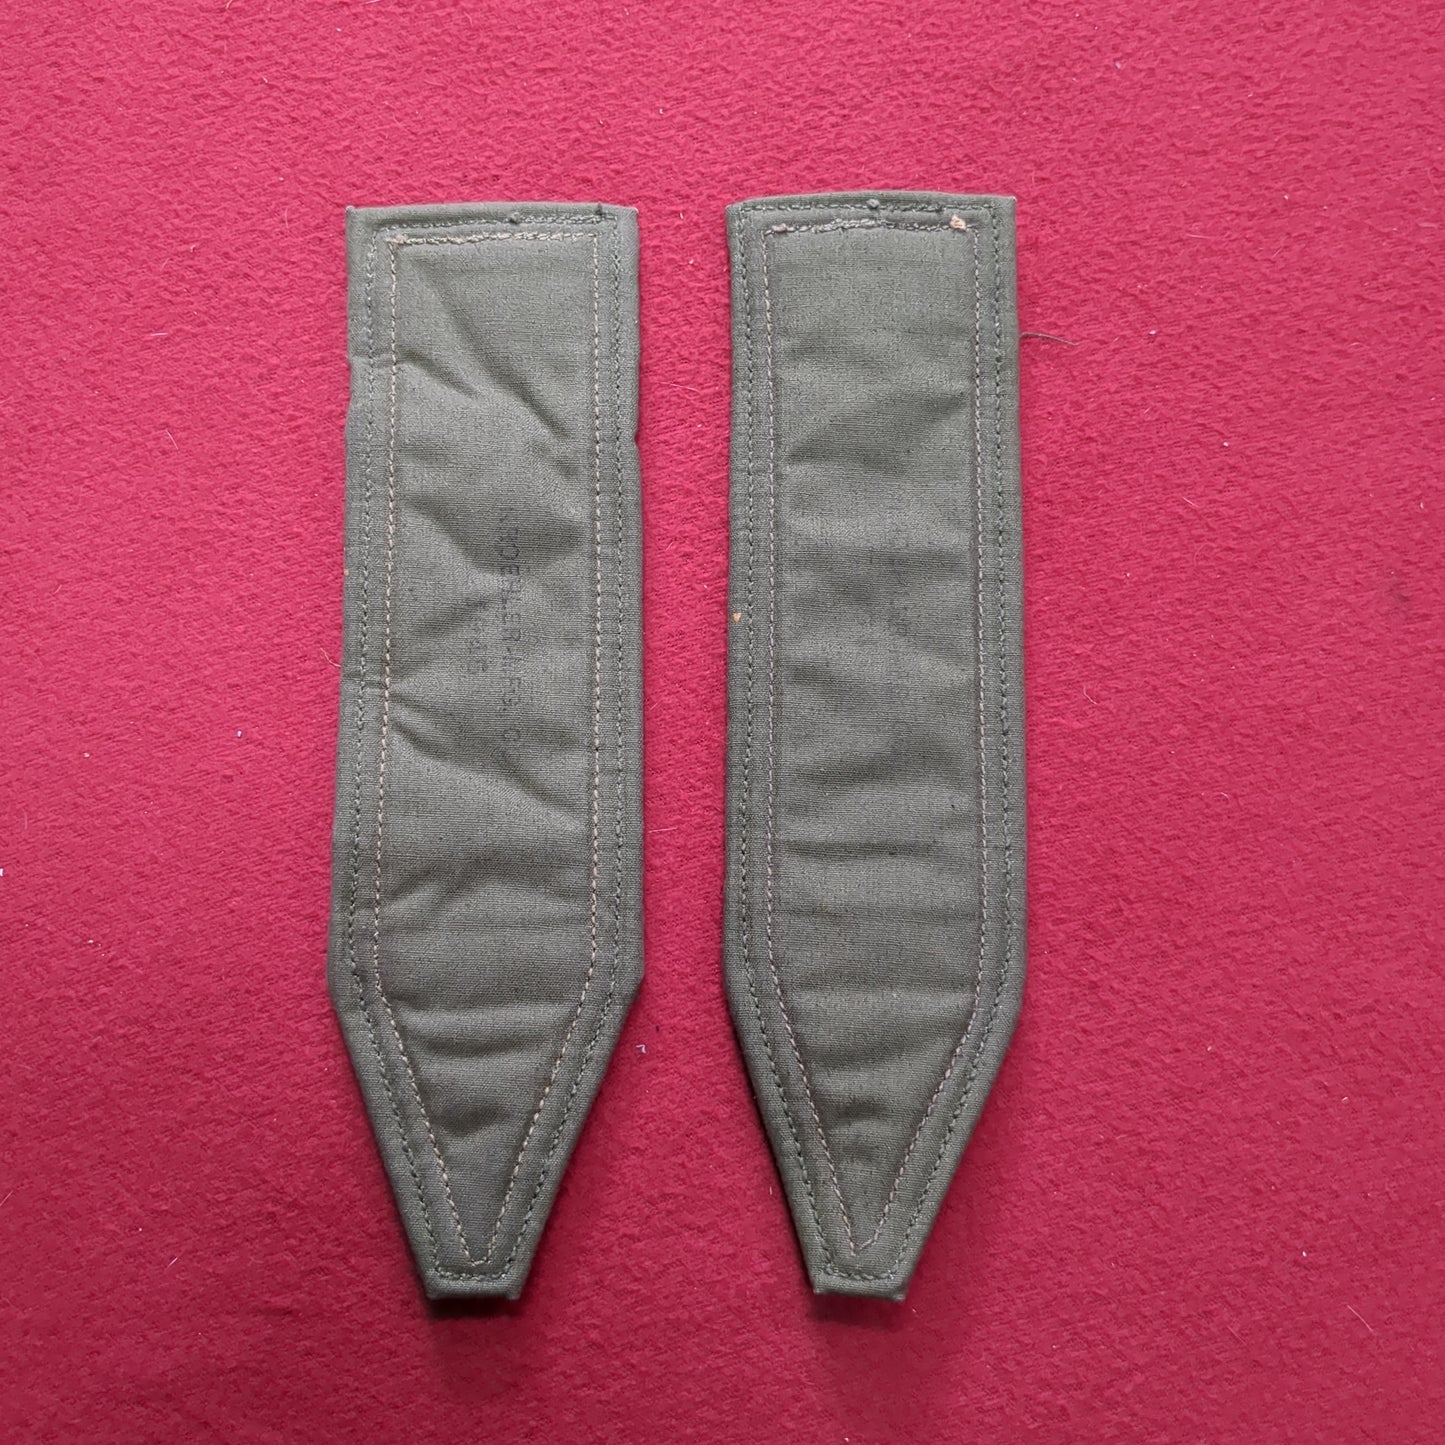 US Army 1945 Pair of Shoulder Straps (19a14)